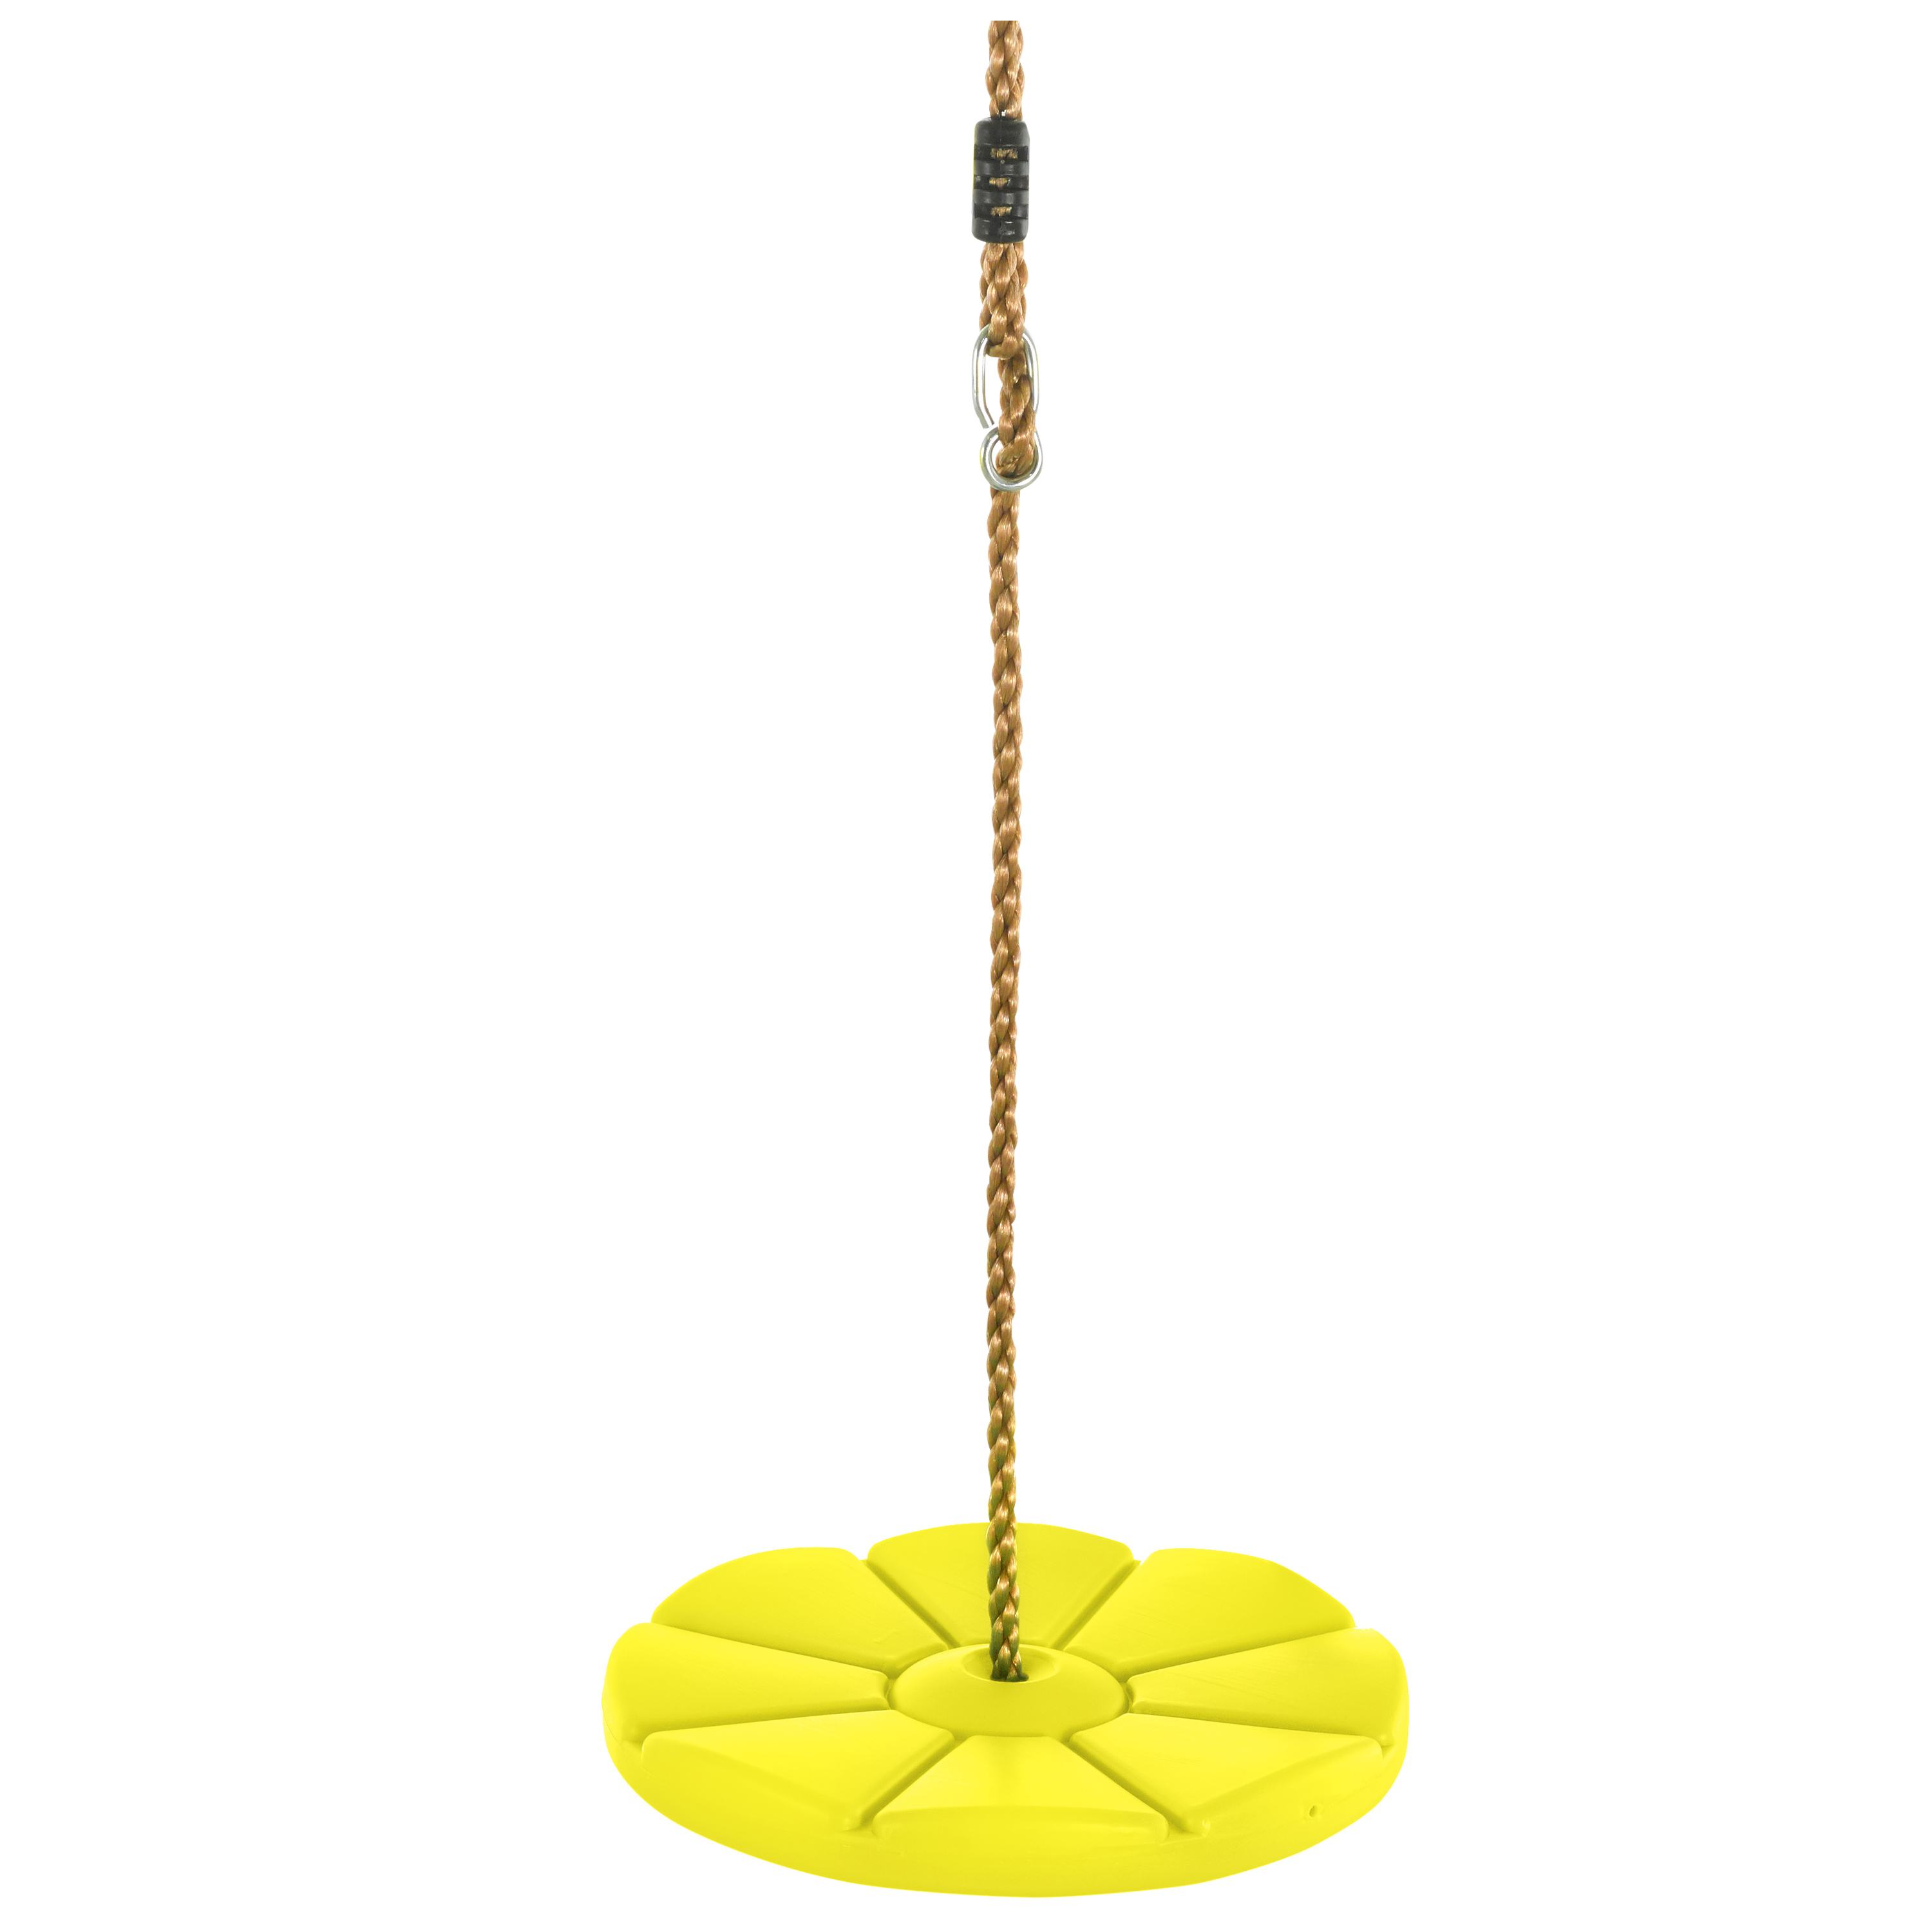 Swingan Cool Disc Swing with Adjustable Rope Only $15.53!